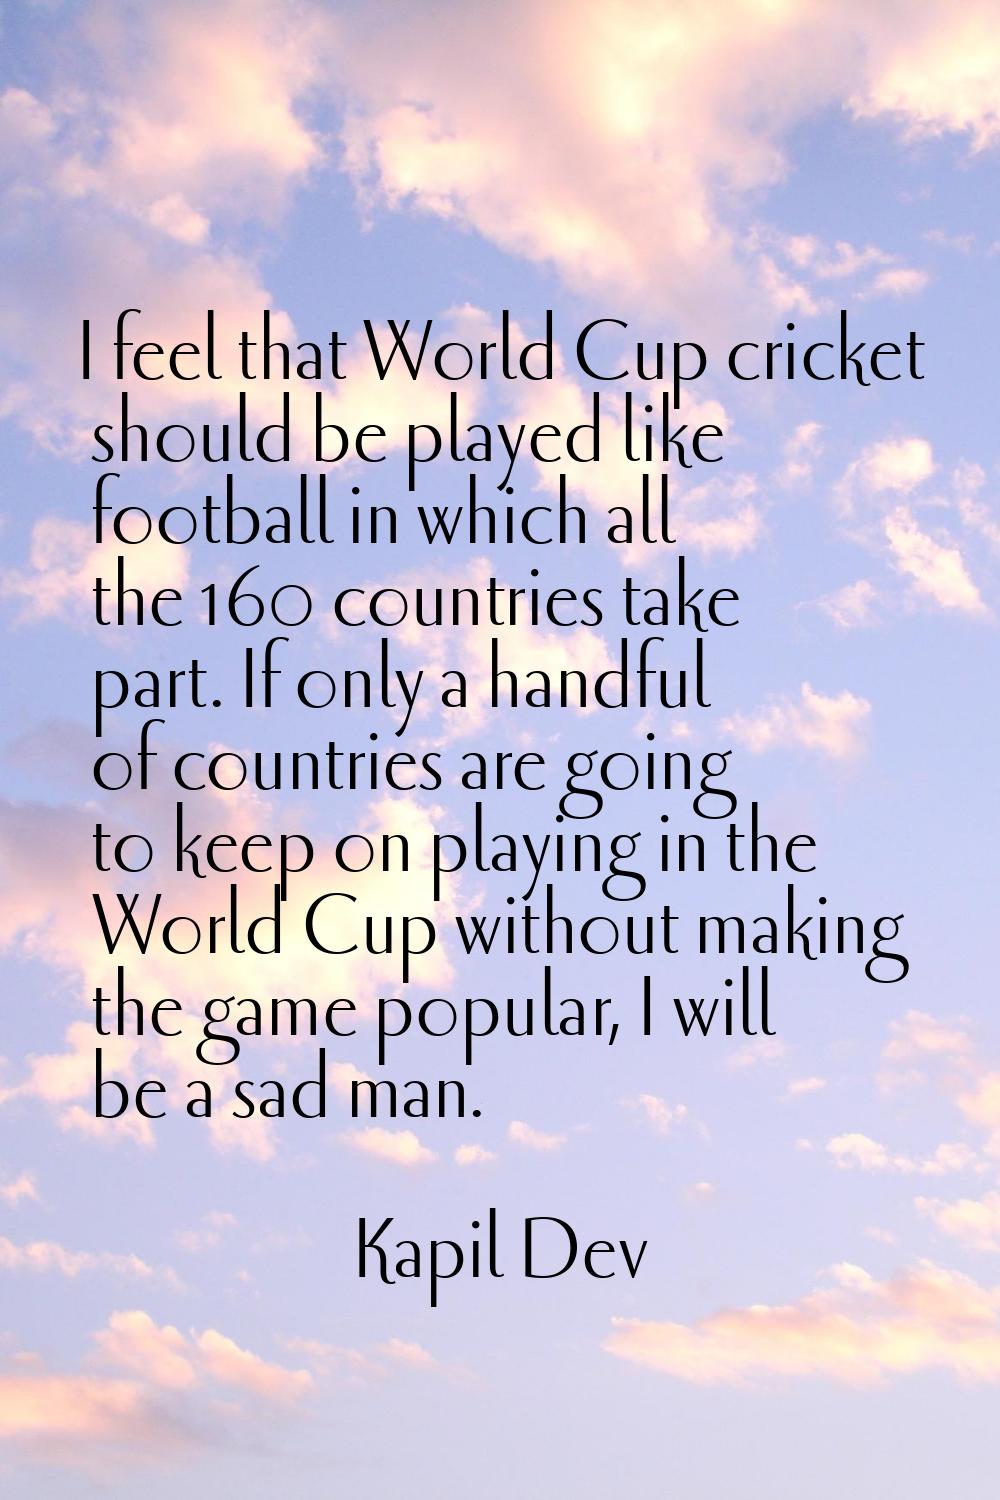 I feel that World Cup cricket should be played like football in which all the 160 countries take pa